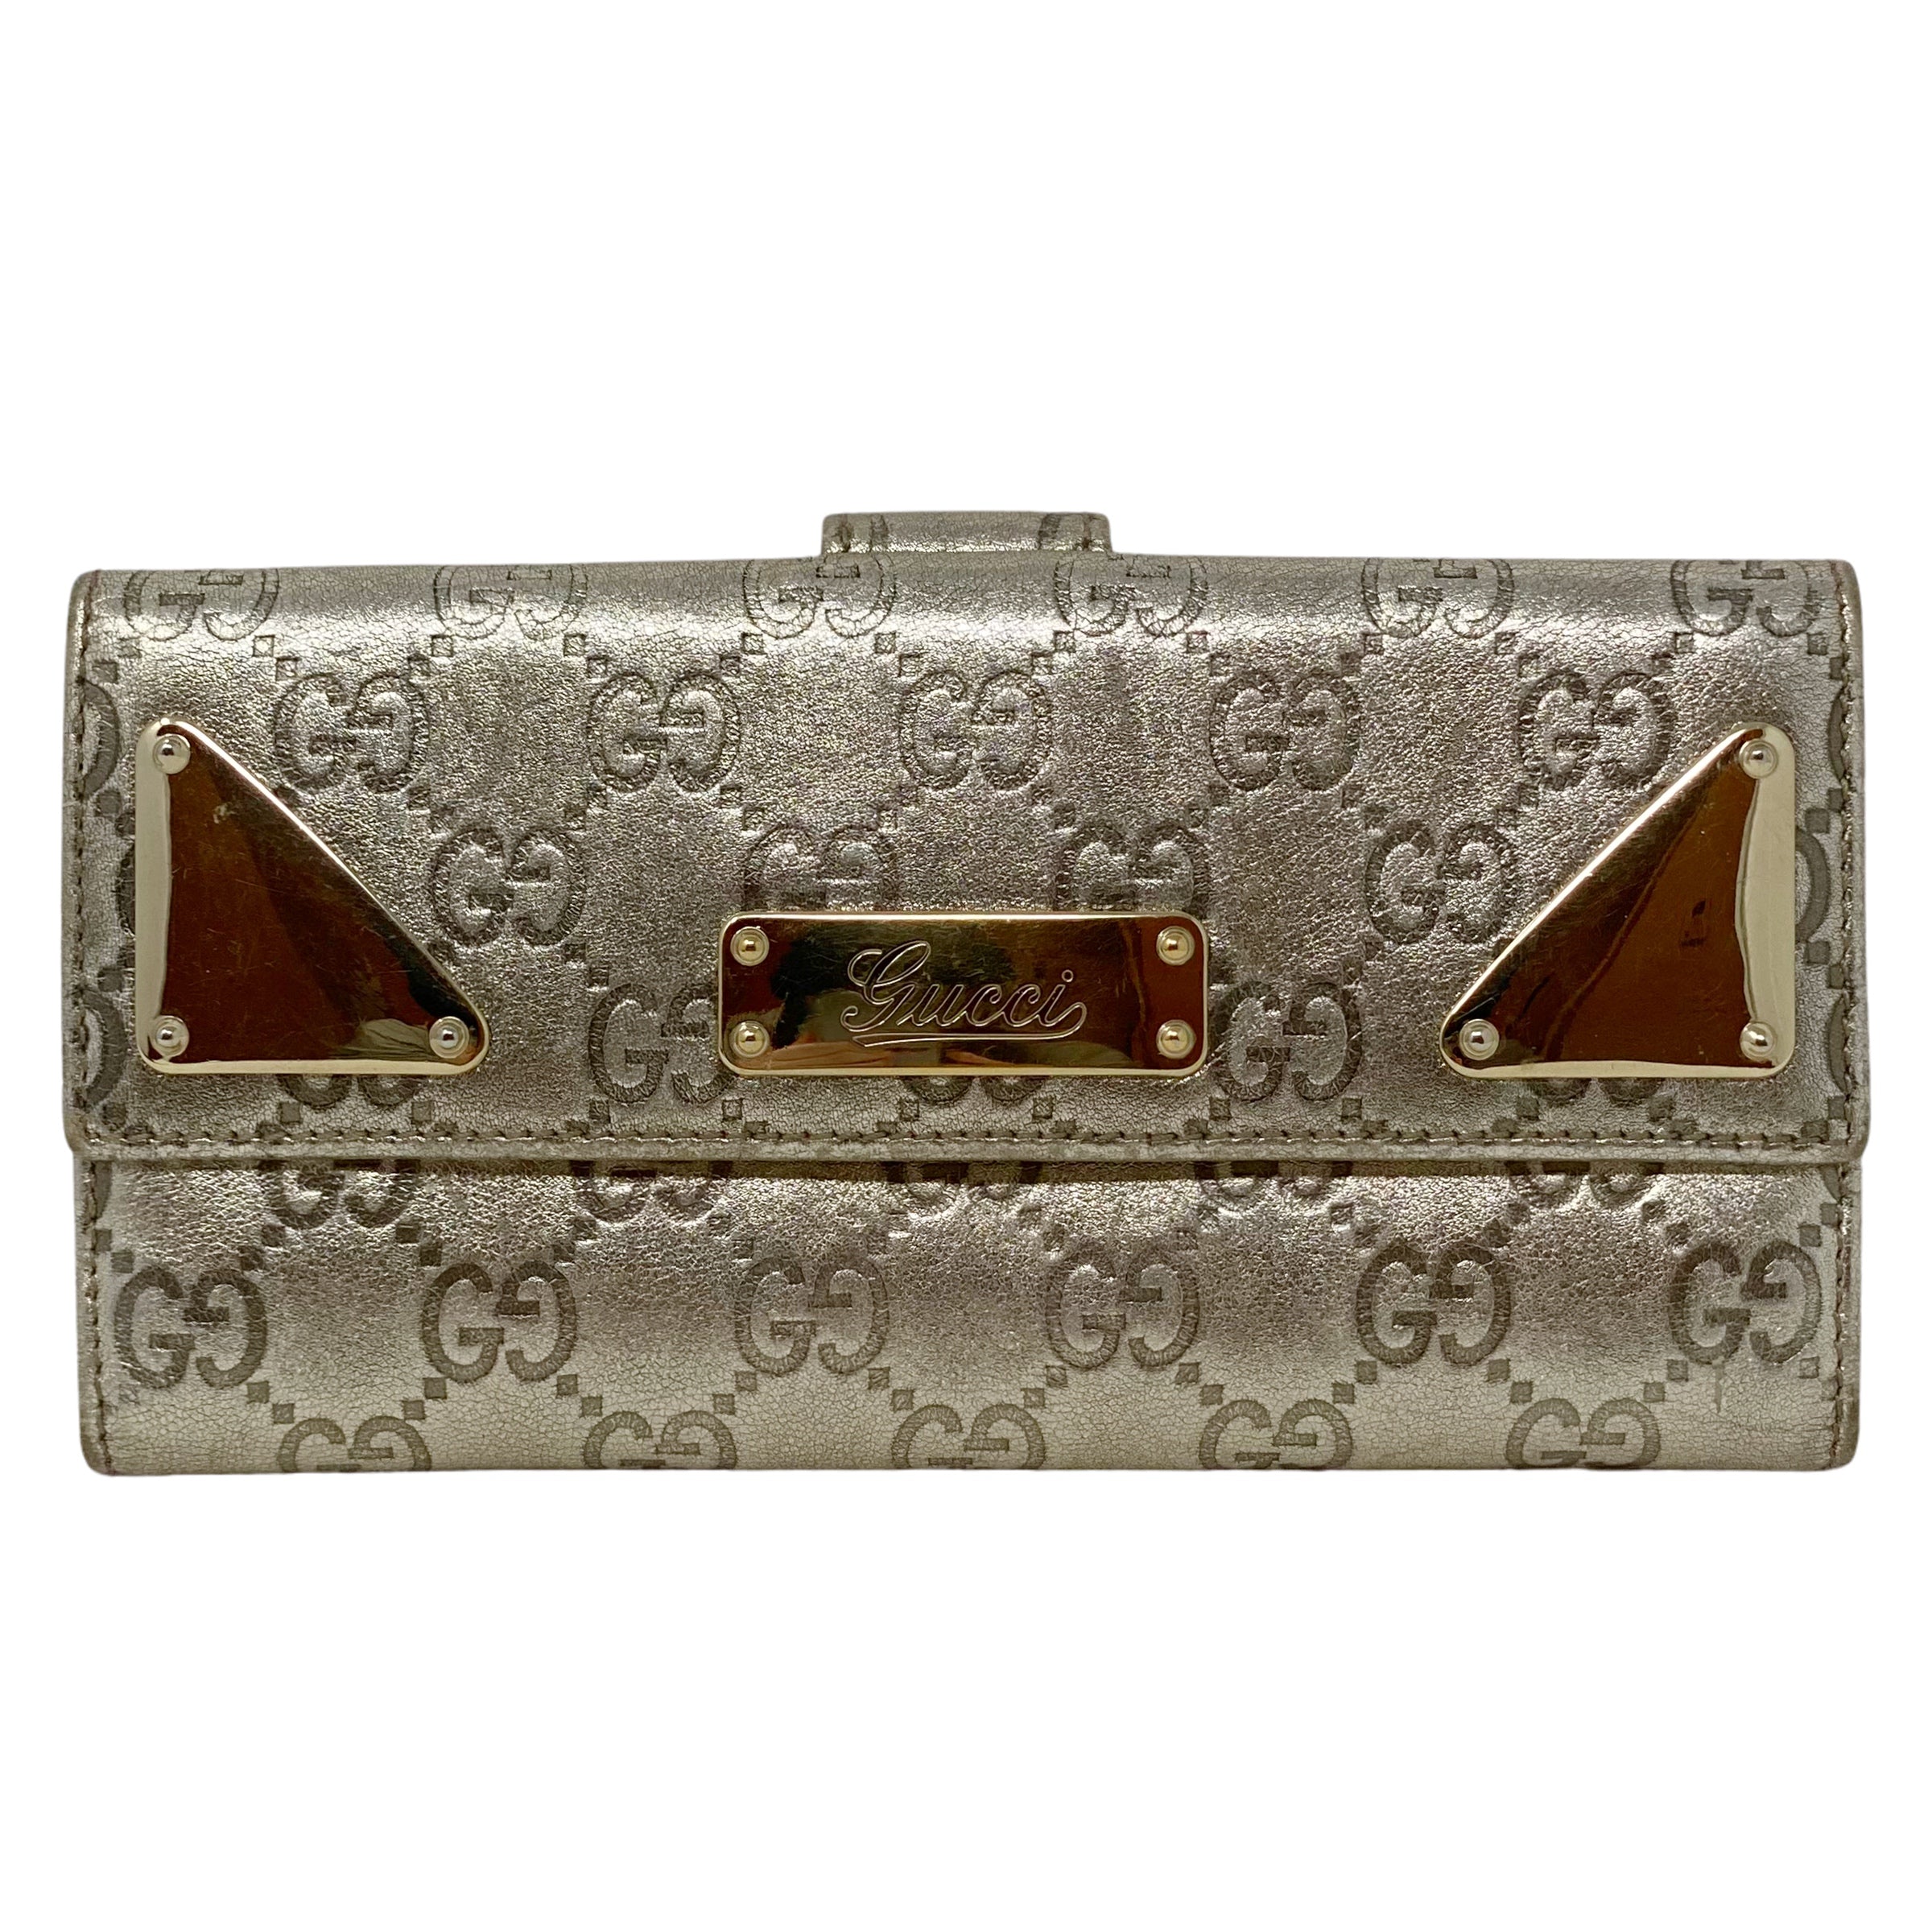 Gucci Metallic Gold Guccissima Indy Continental Wallet